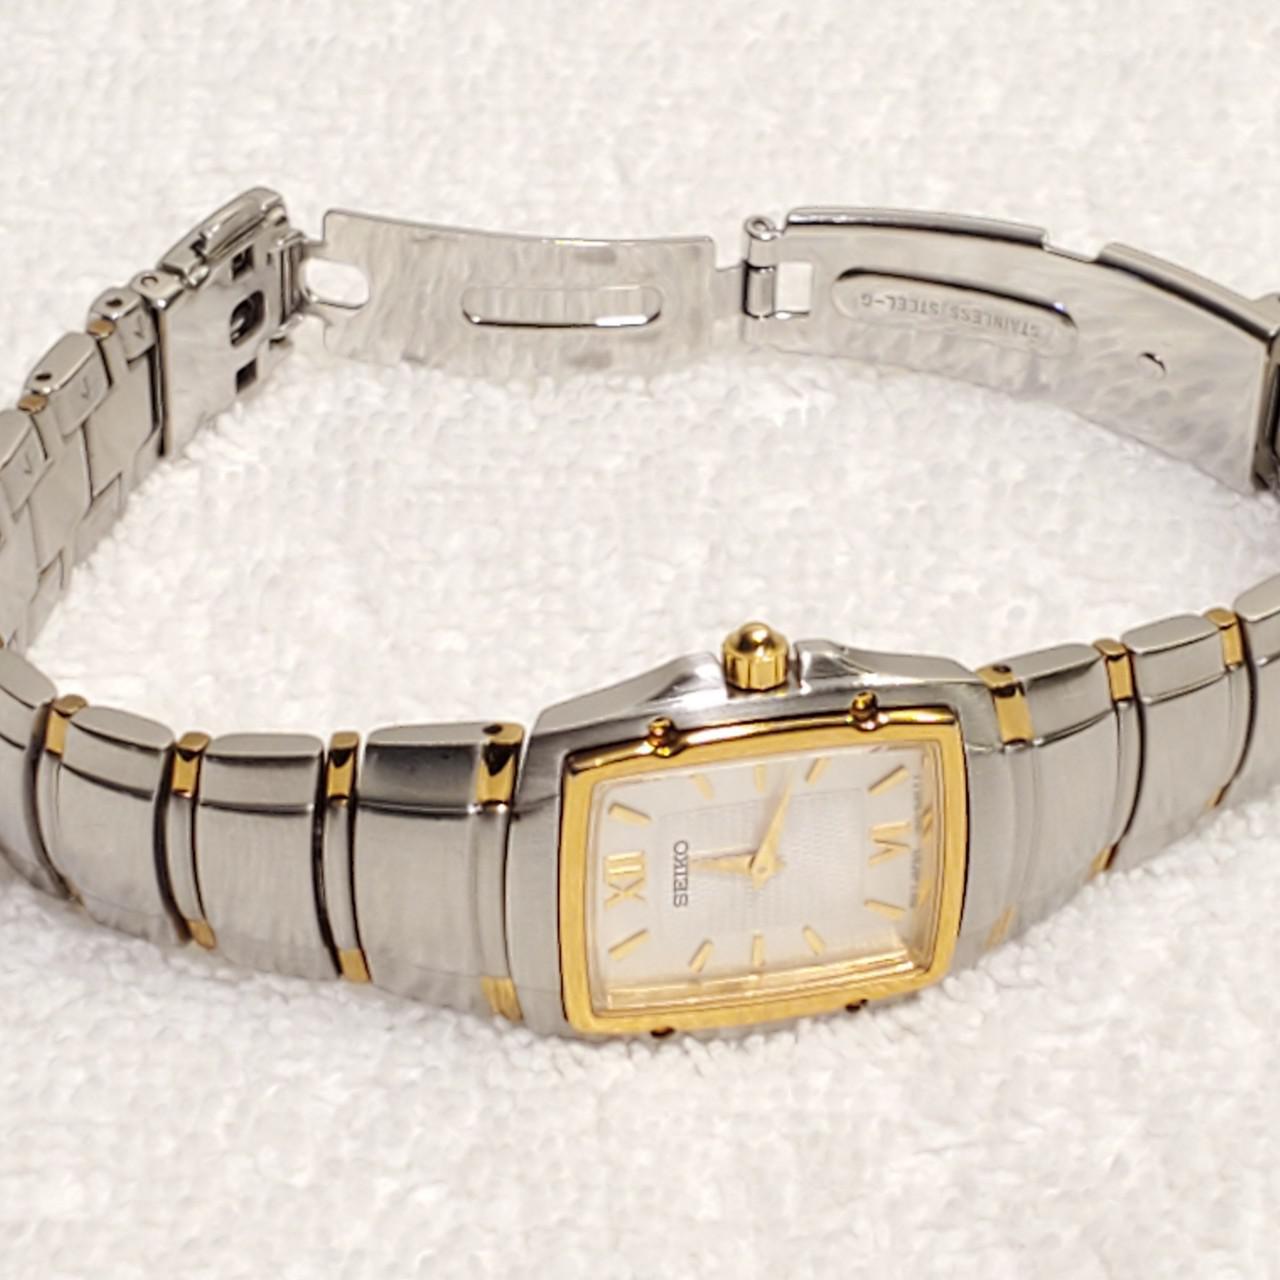 Seiko Women's Gold and Silver Watch (2)